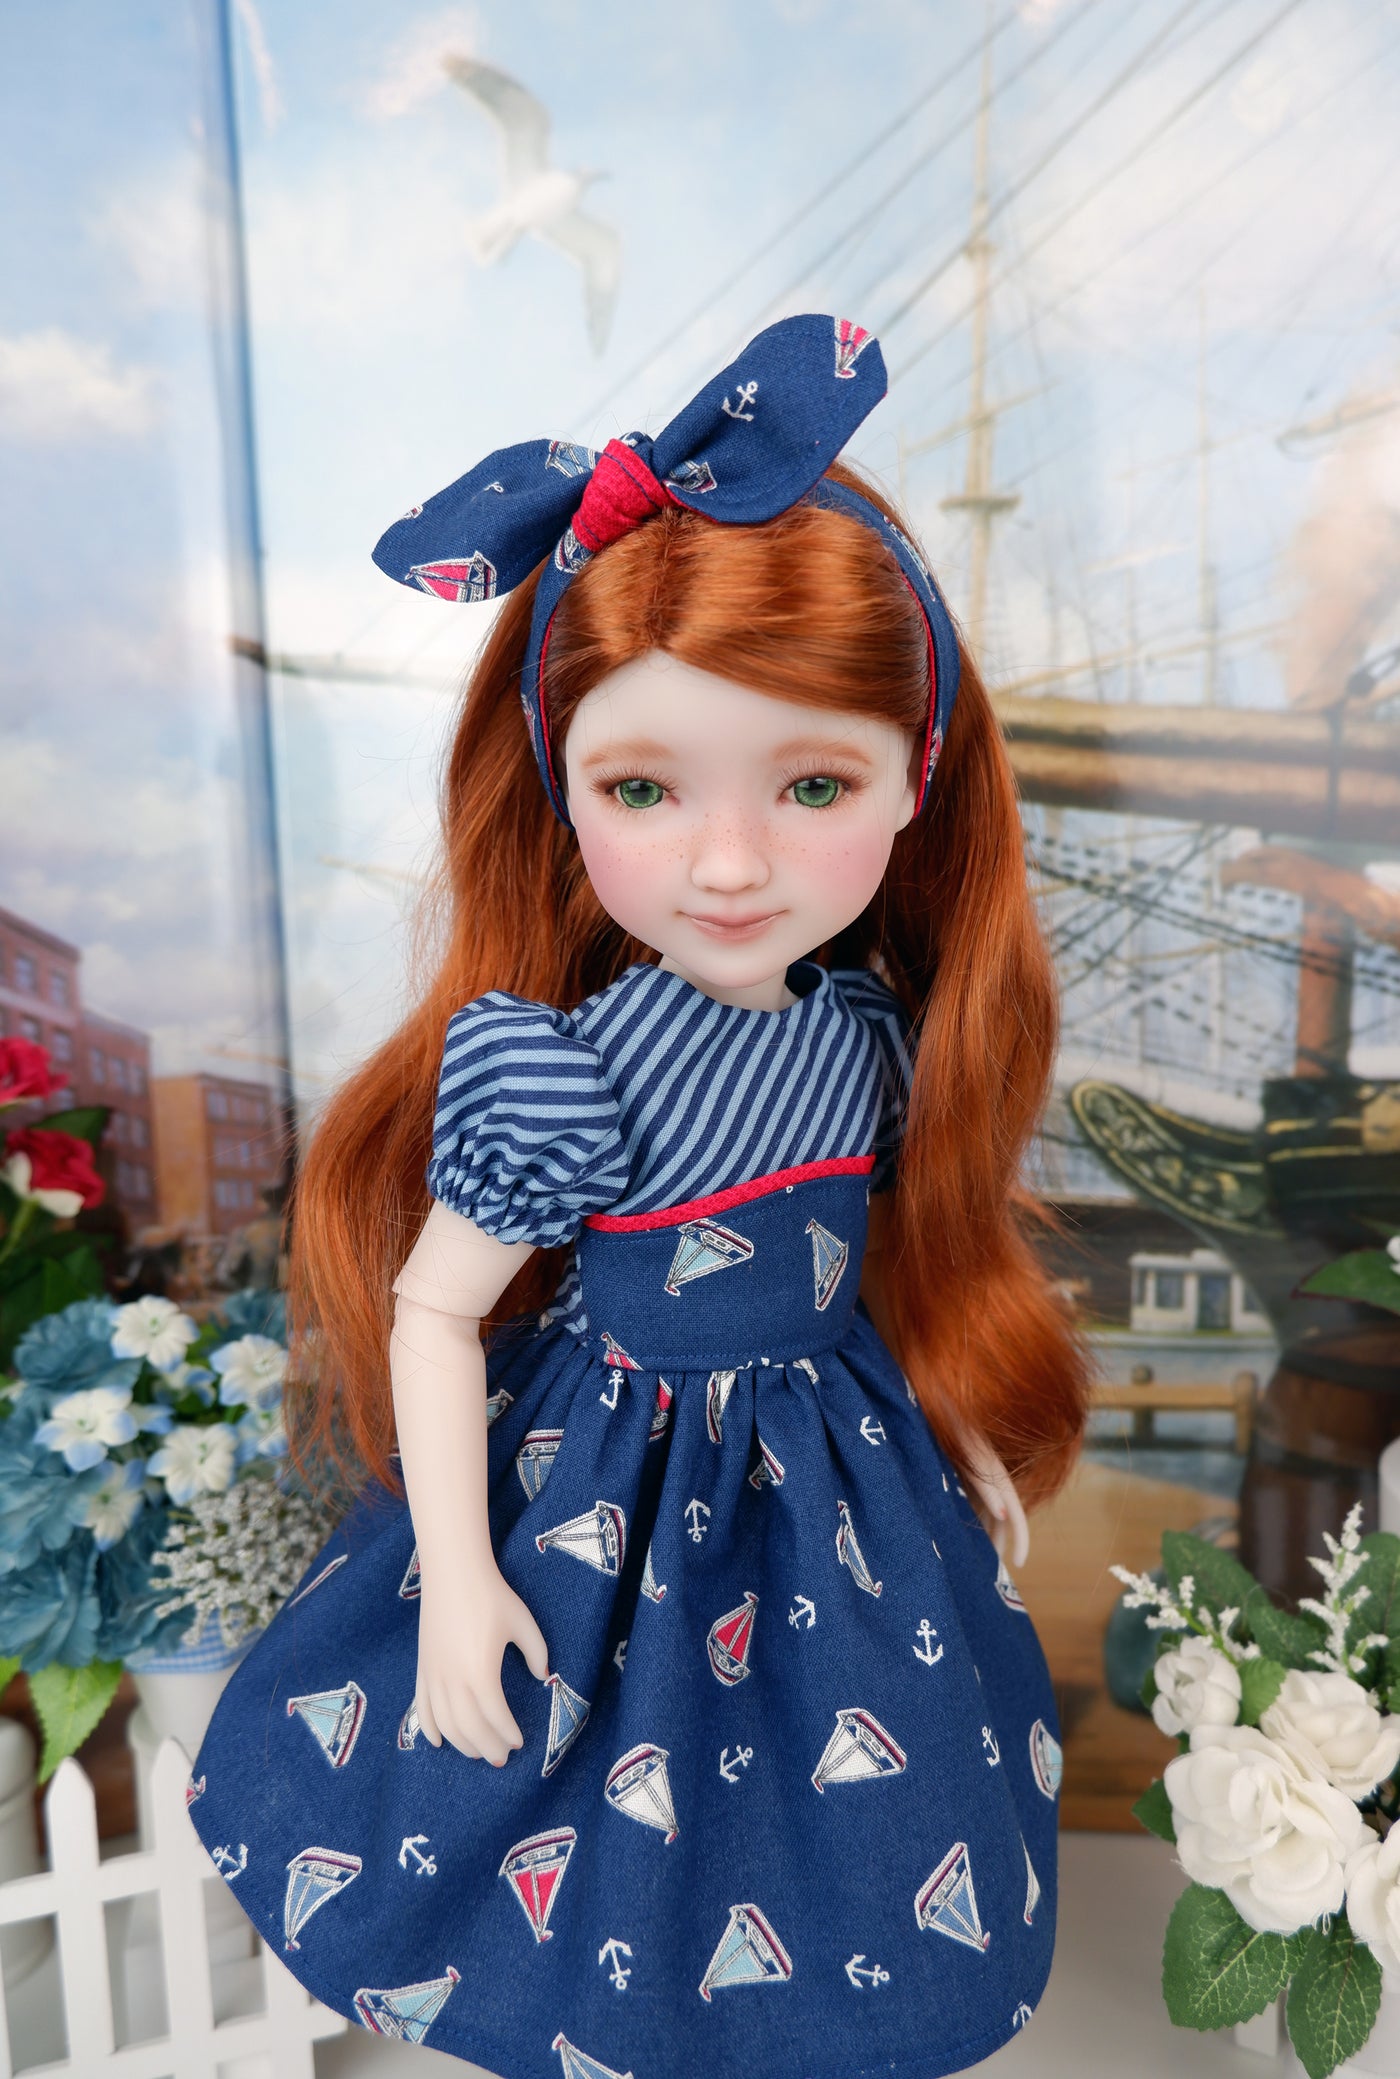 Sailboat - dress and shoes for Ruby Red Fashion Friends doll